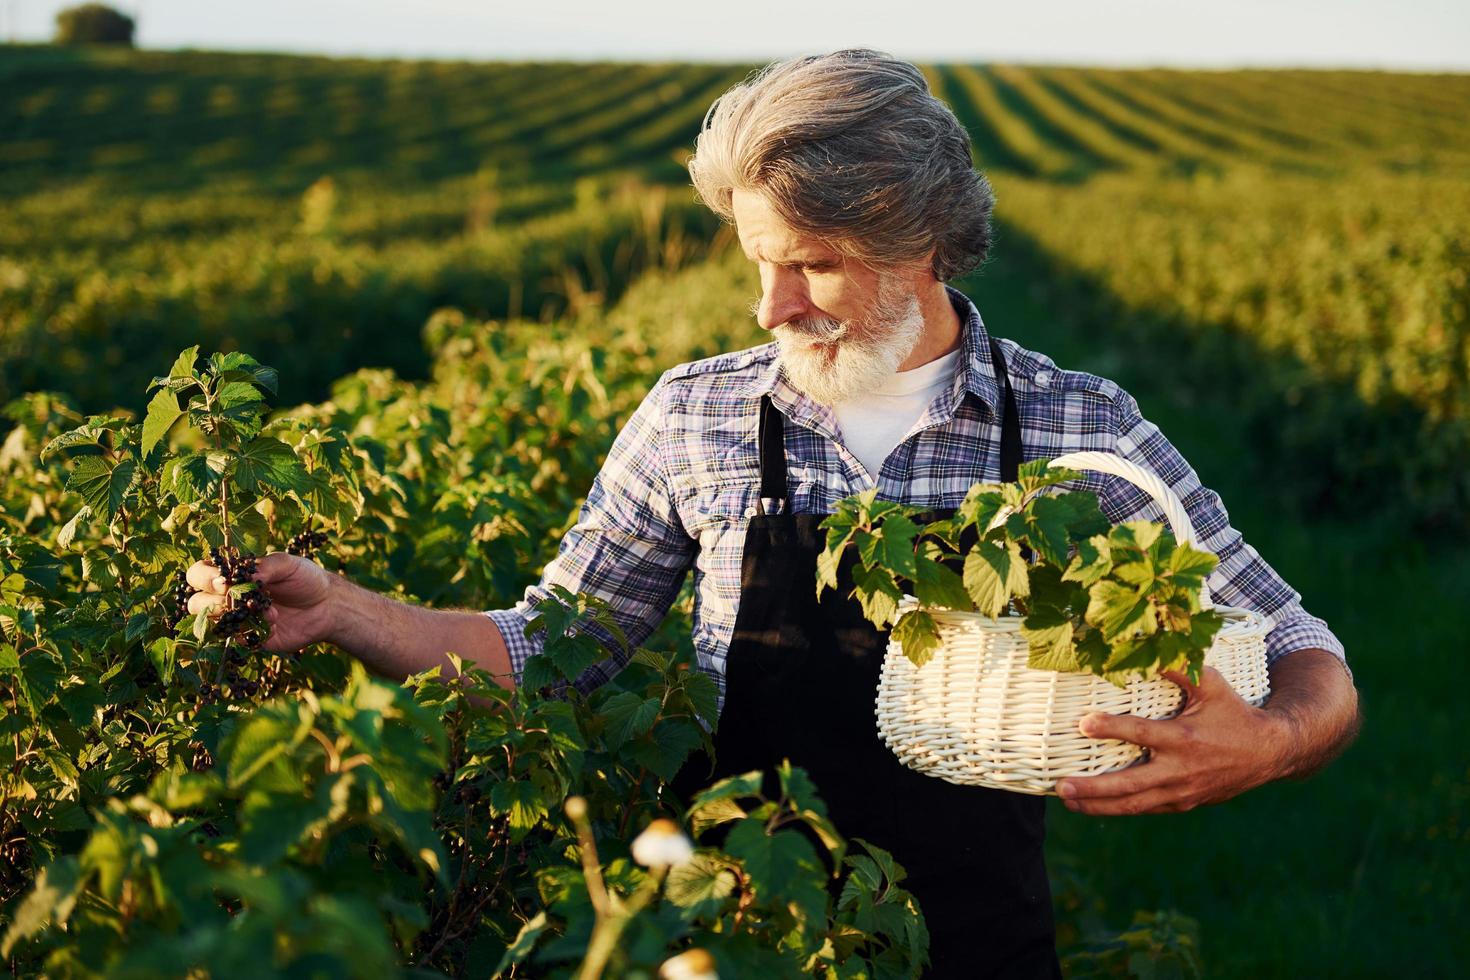 With basket in hands. Senior stylish man with grey hair and beard on the agricultural field with harvest photo